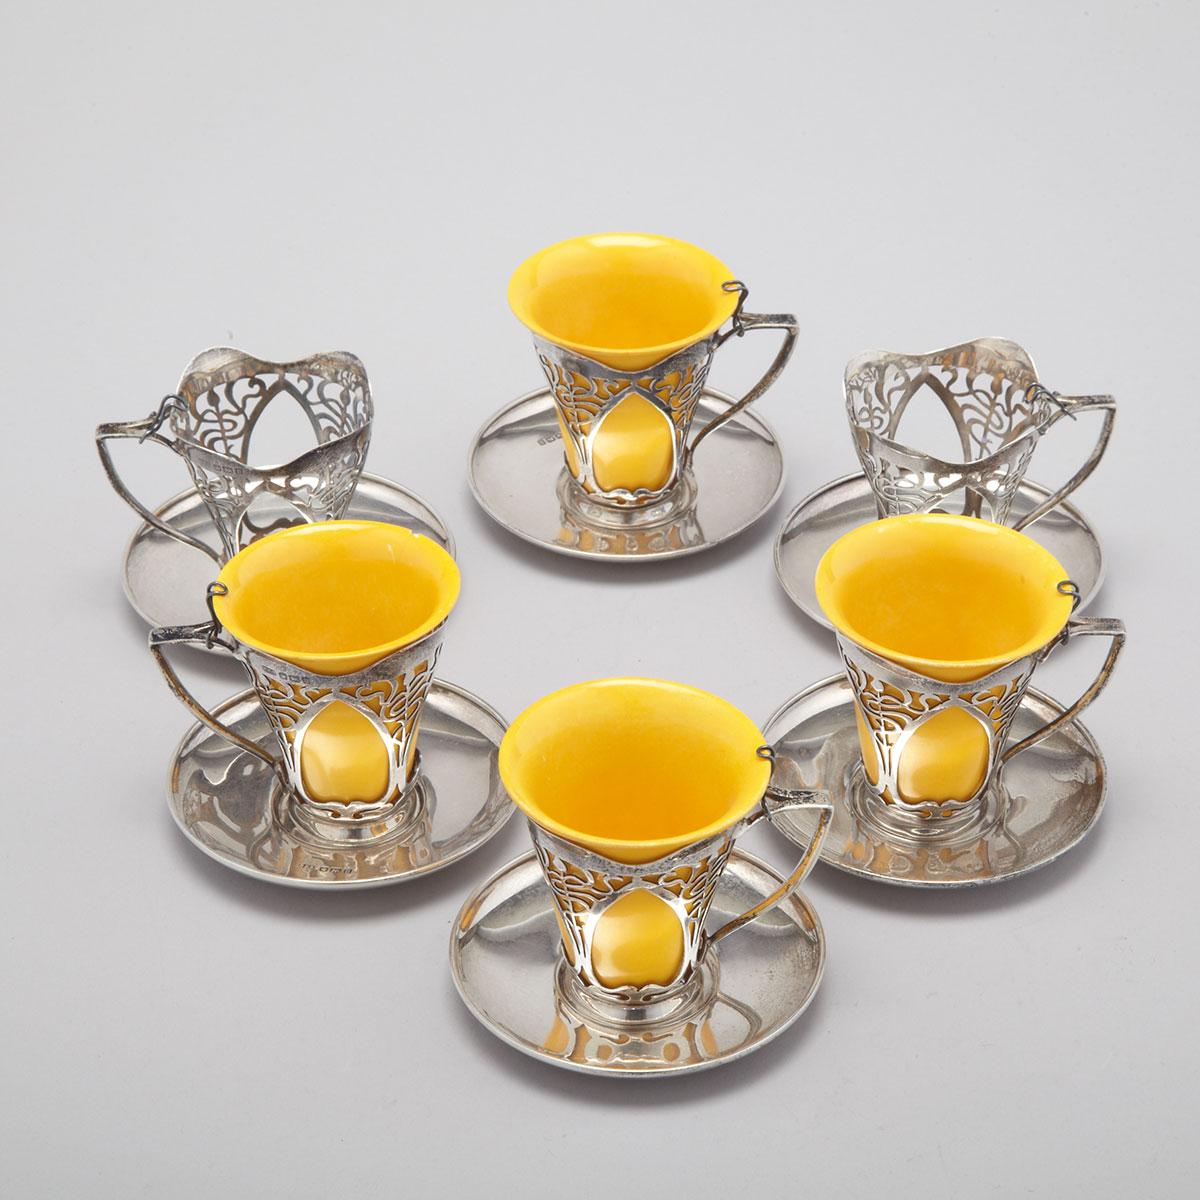 Six English Silver Mounted Royal Doulton Yellow Glazed Coffee Cups and Saucers, Roberts & Belk, Sheffield, 1912